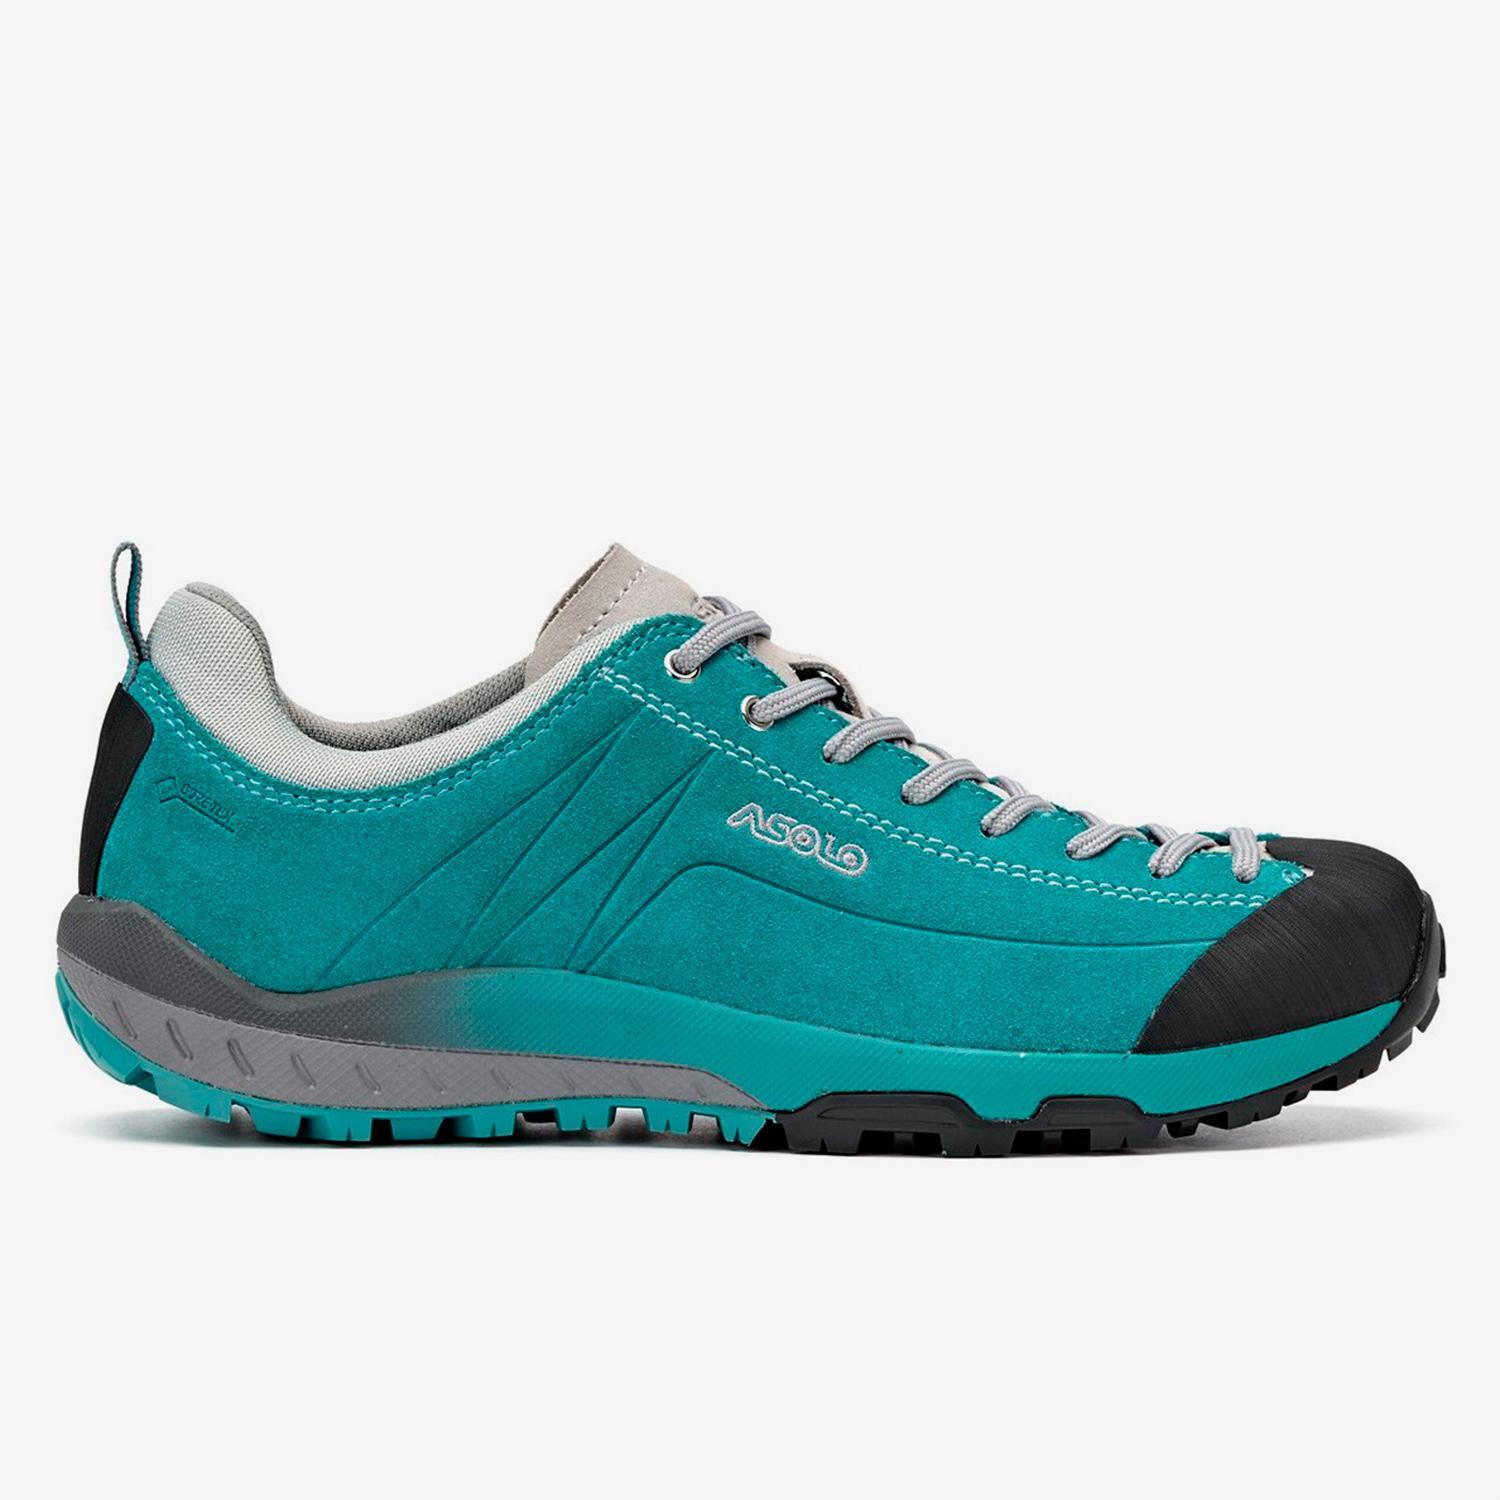 Asolo Space GTX - Turquoise - Chaussures Trekking Femme sports taille 38